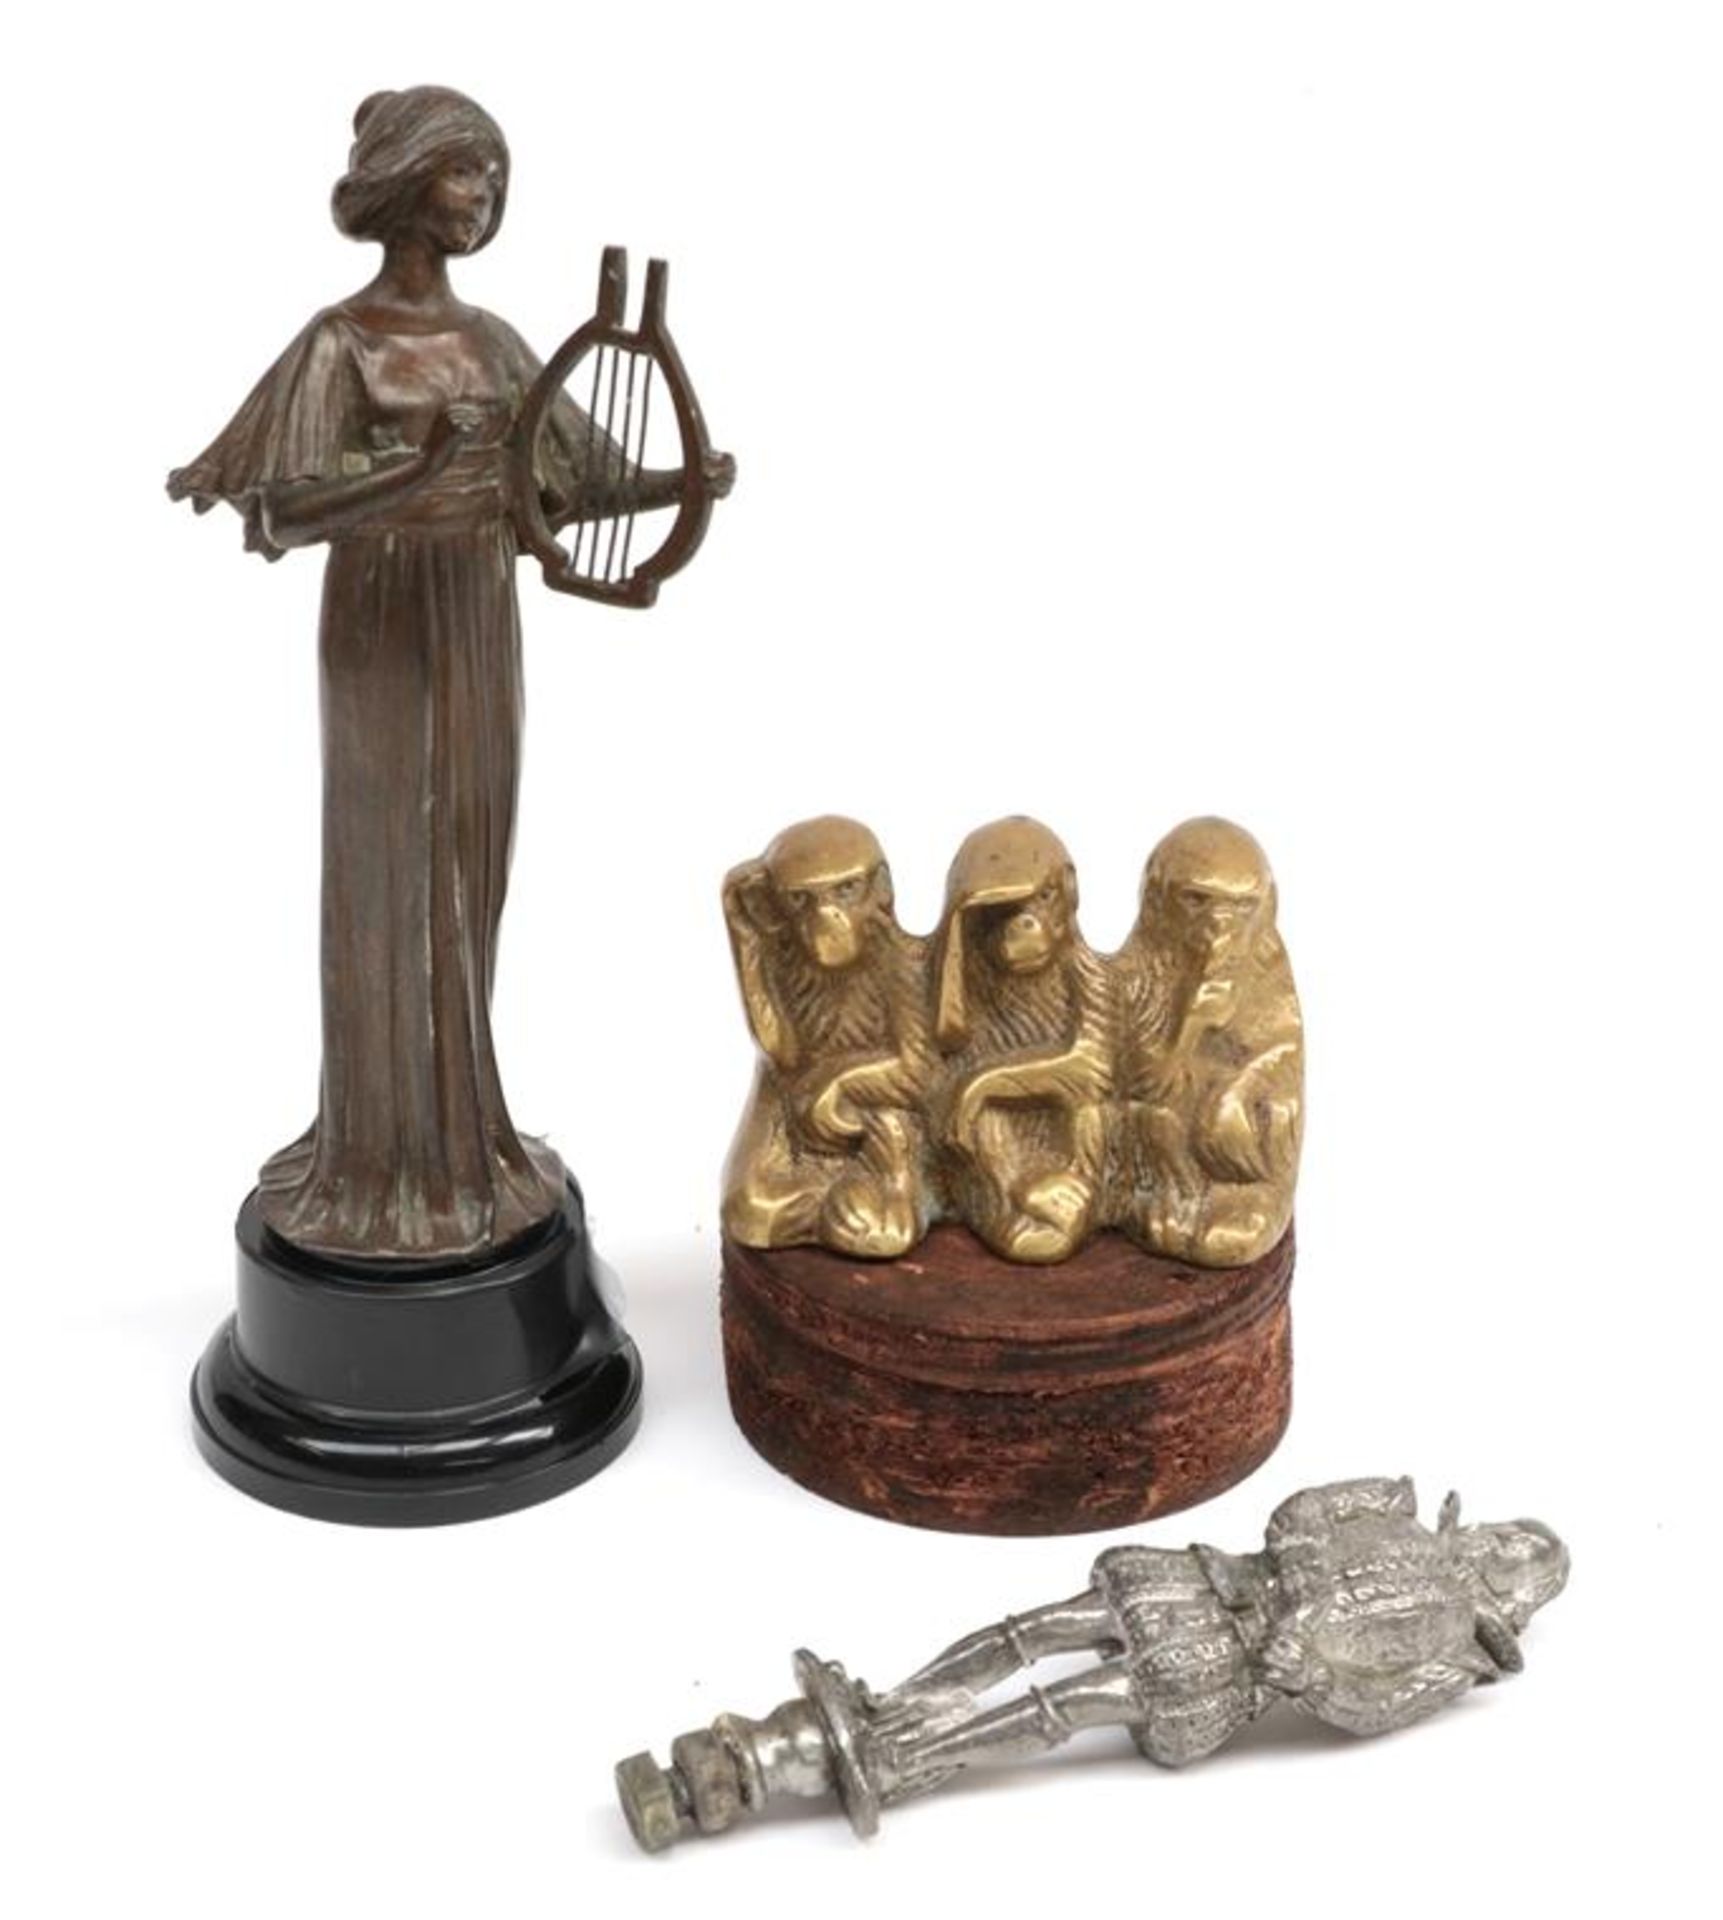 An Early 20th Century Brass Accessory Car Mascot as The Three Wise Monkeys, See No Evil, Speak No